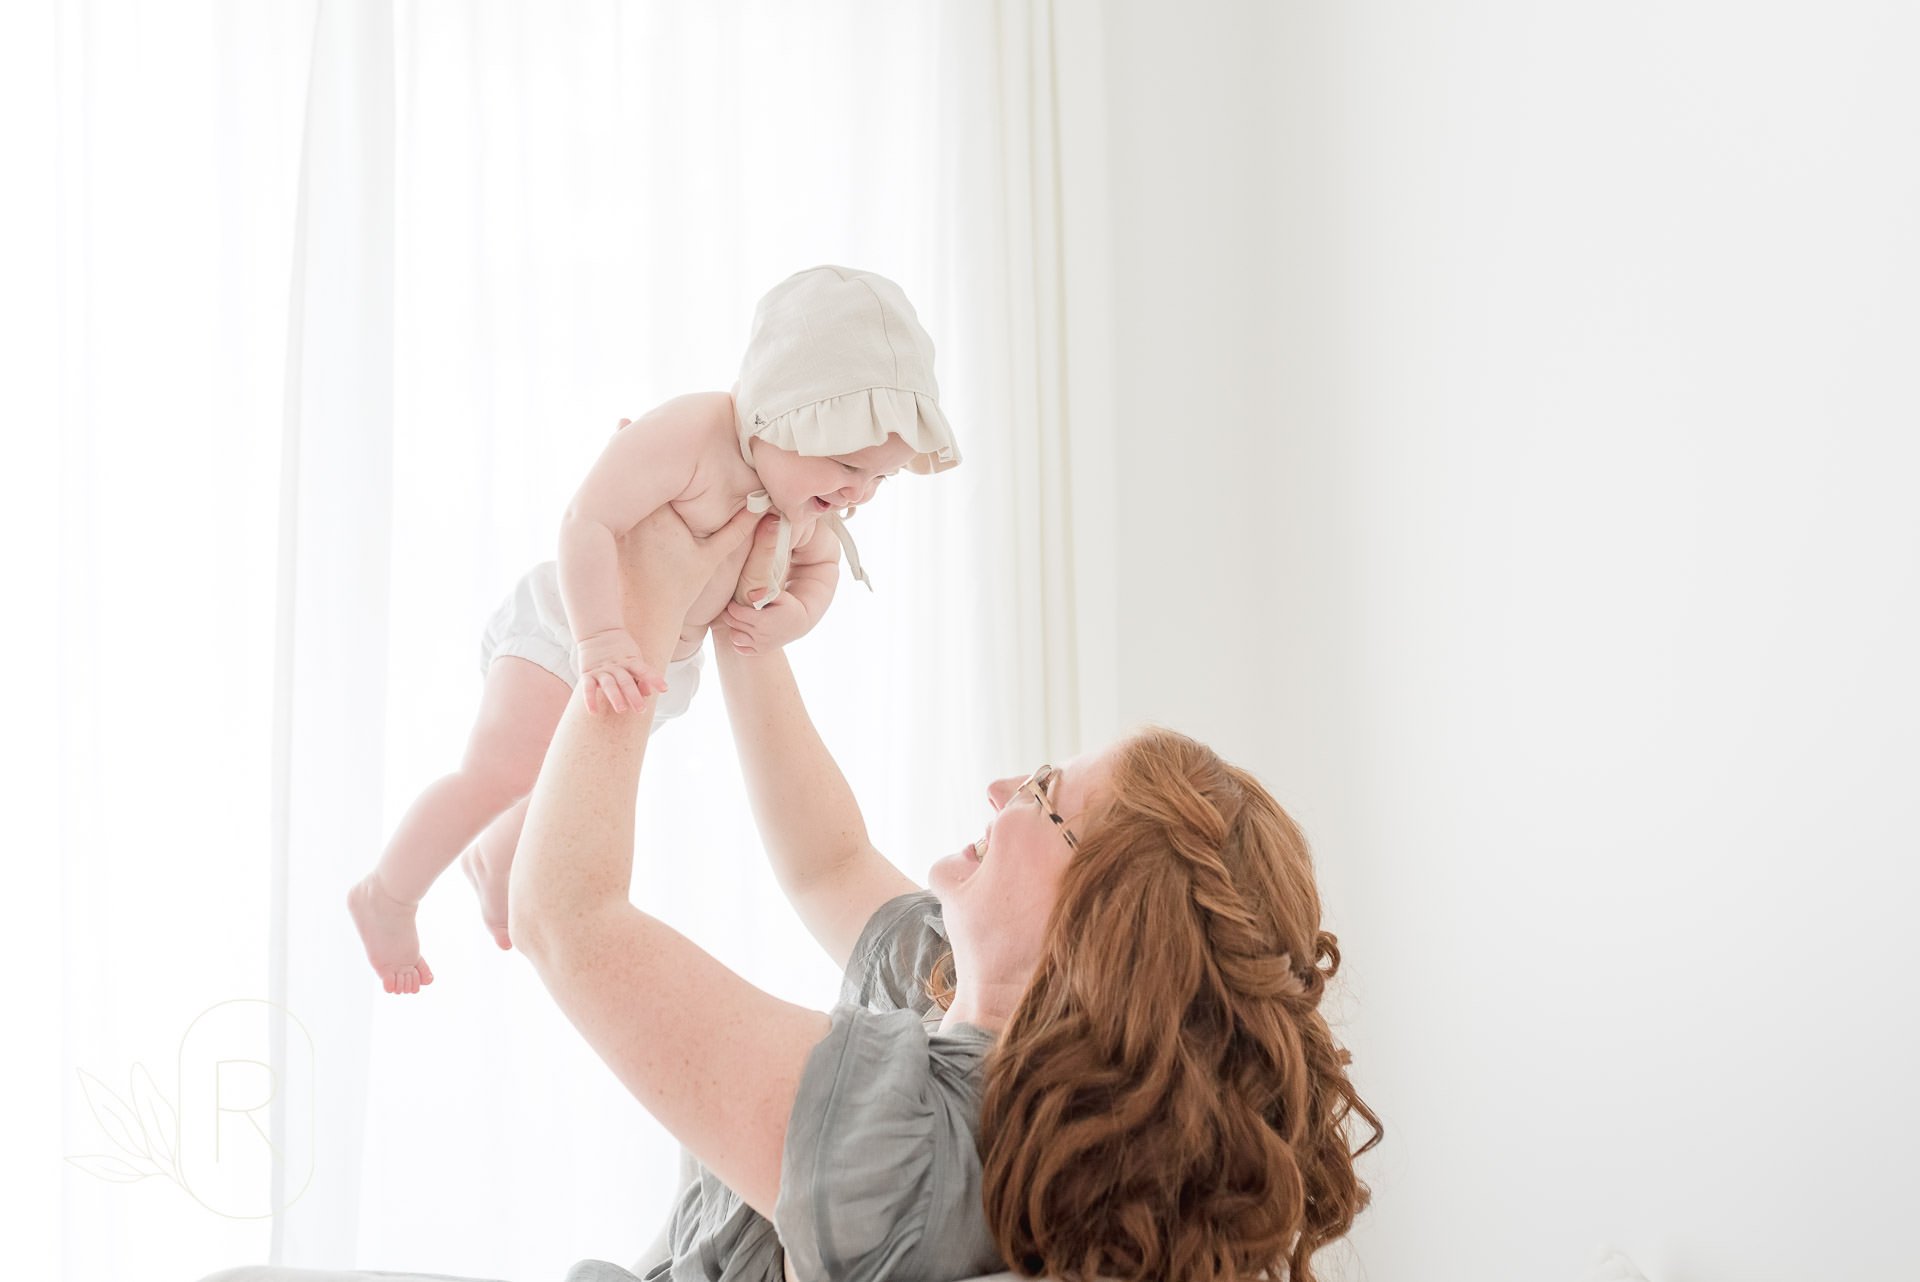 smiling-baby-and-mom-candid-moments-captured-family-photographer-niagara-ontario.jpg